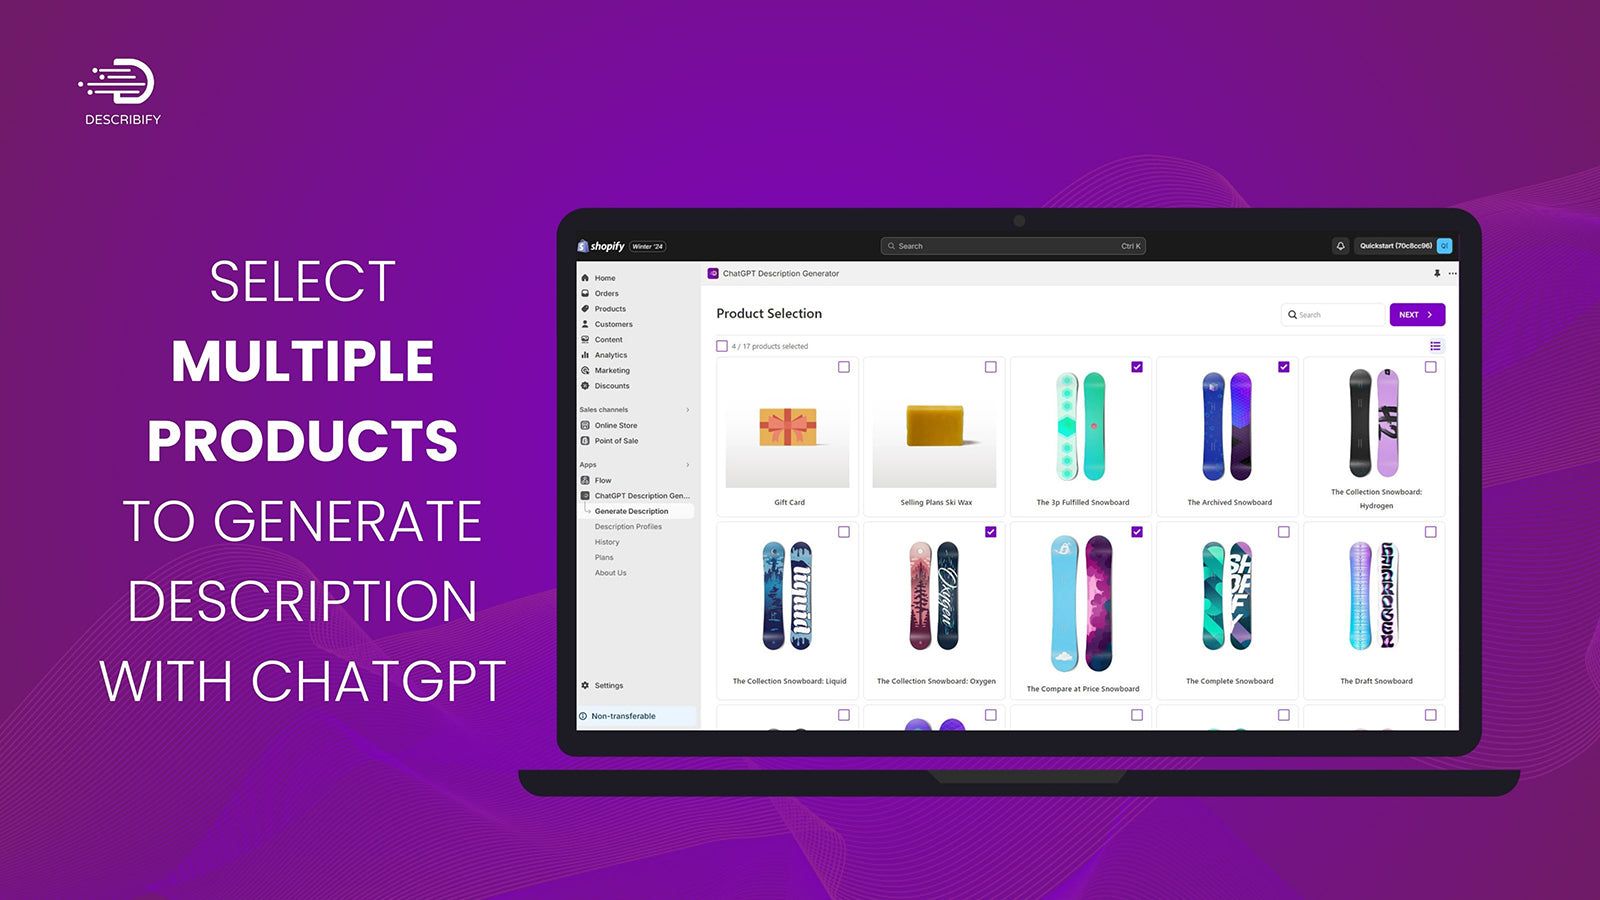 Select multiple products to generate description with ChatGPT